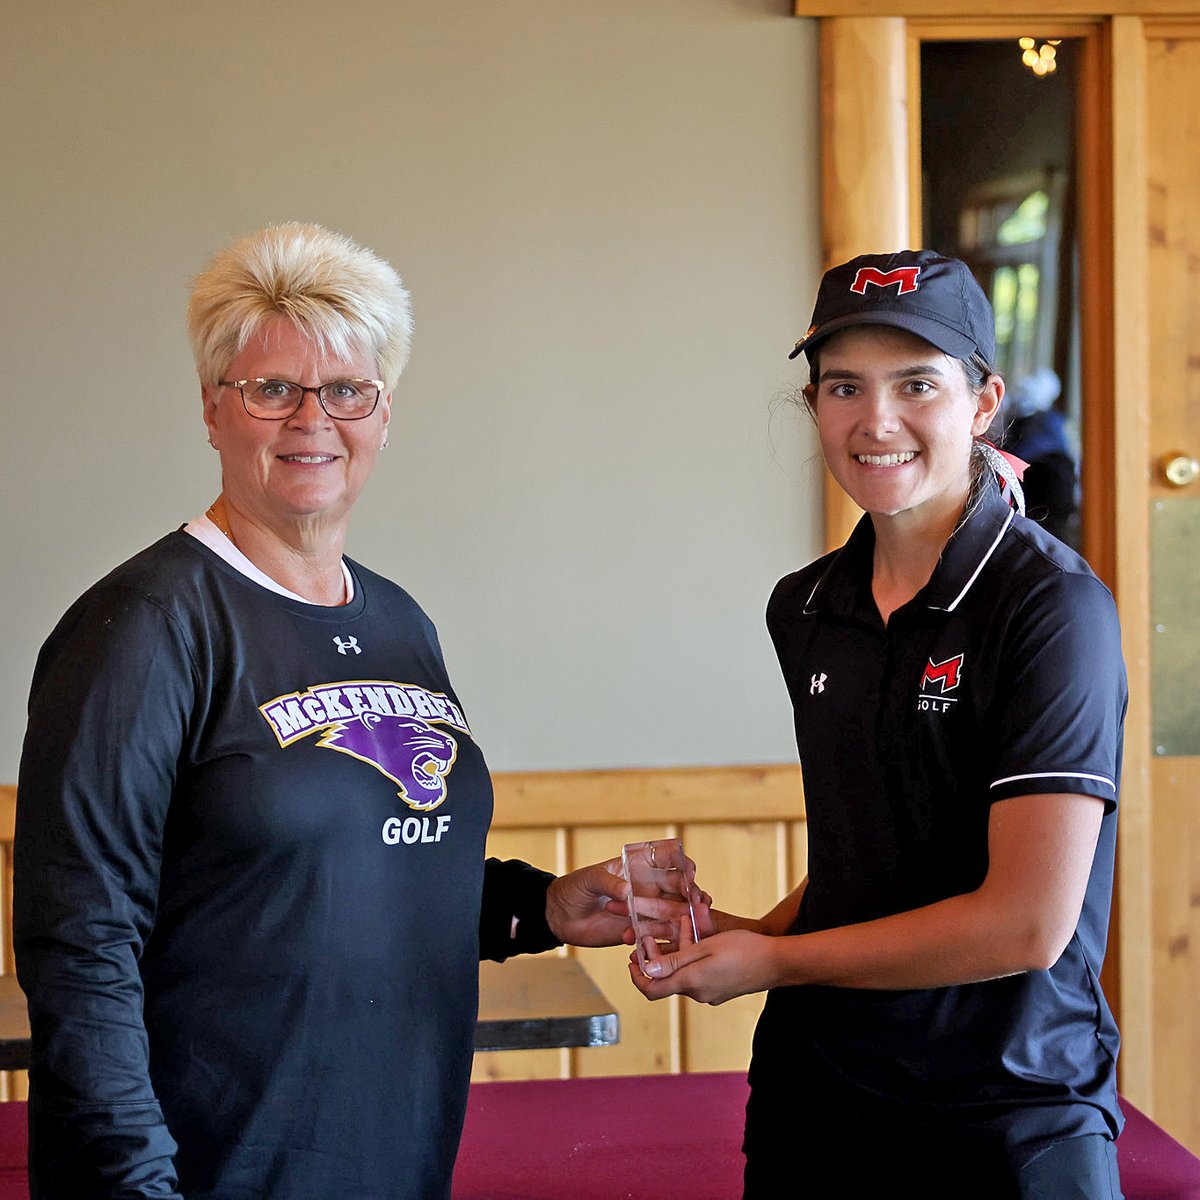 ⛳️Congrats to Saints women's golfer Effie Perakis who finished third overall to earn All-Tournament honors at the McKendree Bearcat Dual Gender Tourney. ⛳🐾#BigRedM #GLVCwgolf @maryvillewgolf (📸 photo by McKendree Athletics)